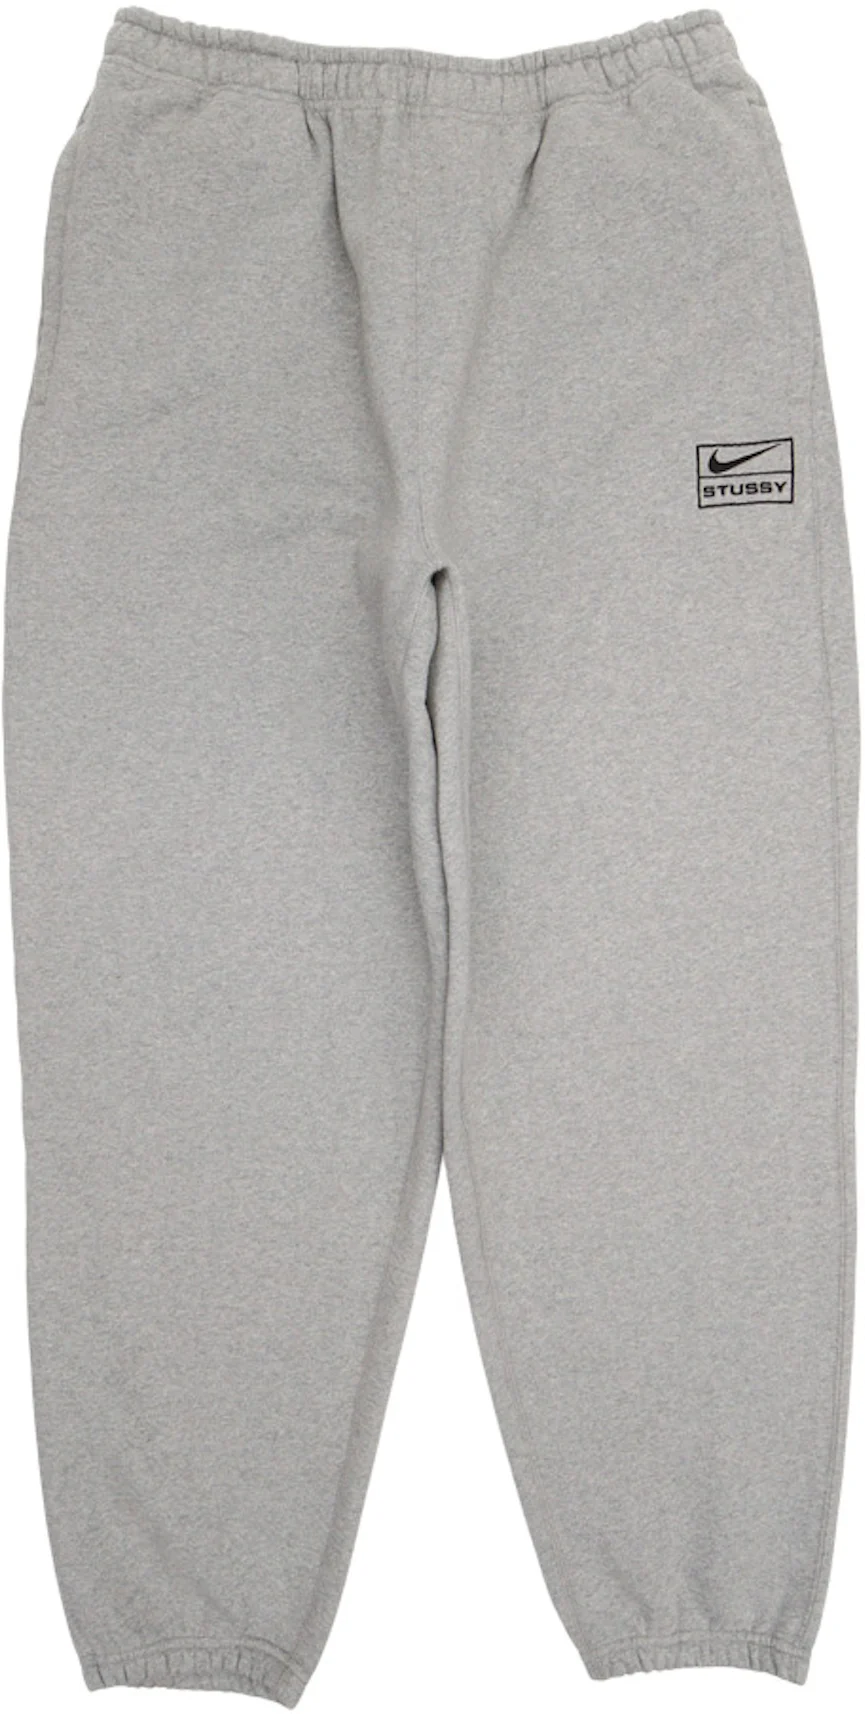 IN LOVE W THE FIT OF THESE SWEATPANTS #stussy #stussyxnike